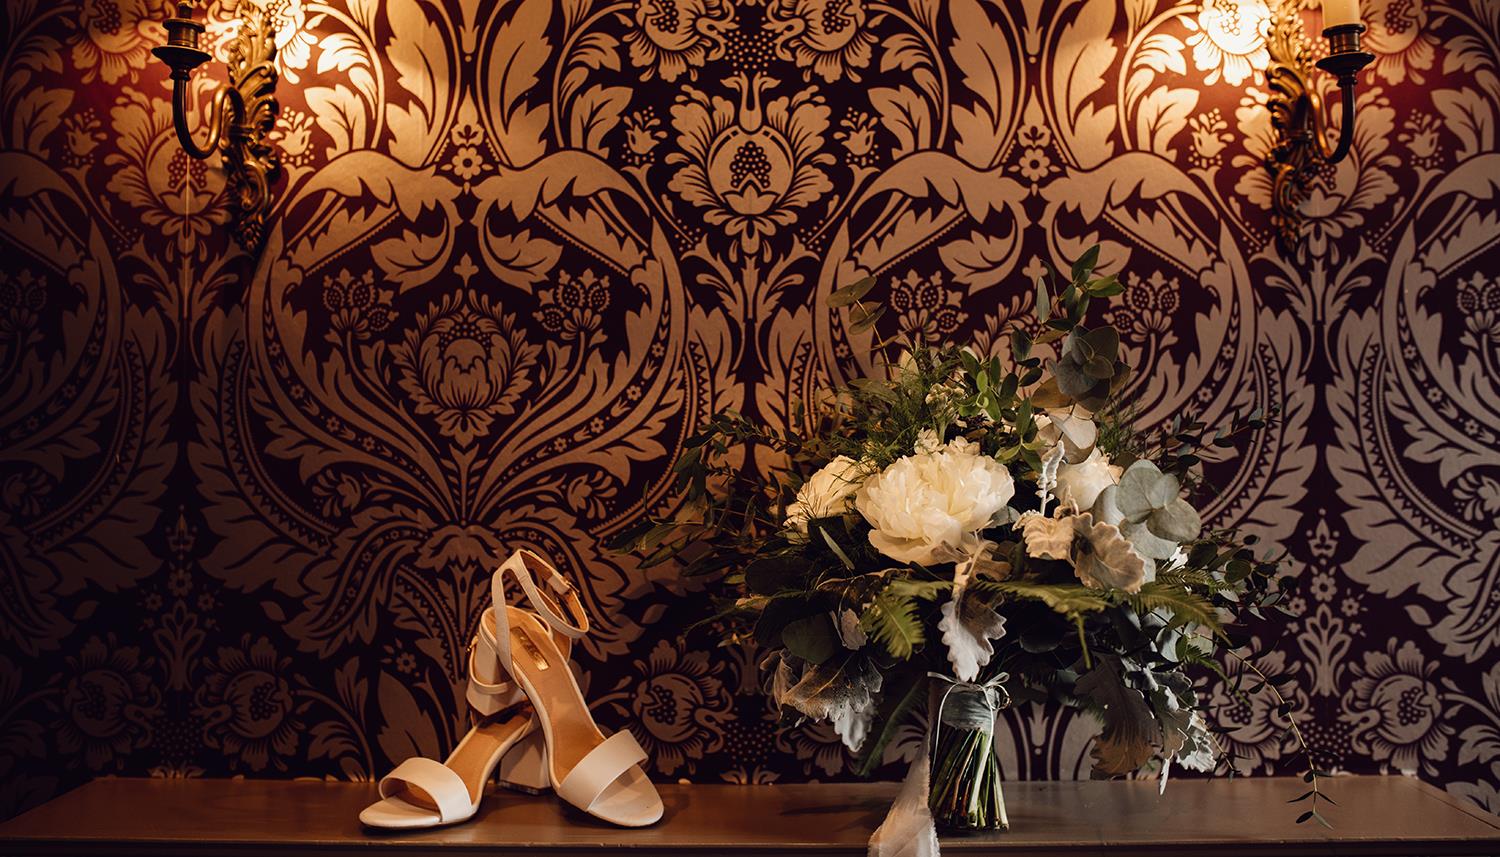 Shoes and flowers. Photo Credit: Honeydew Moments